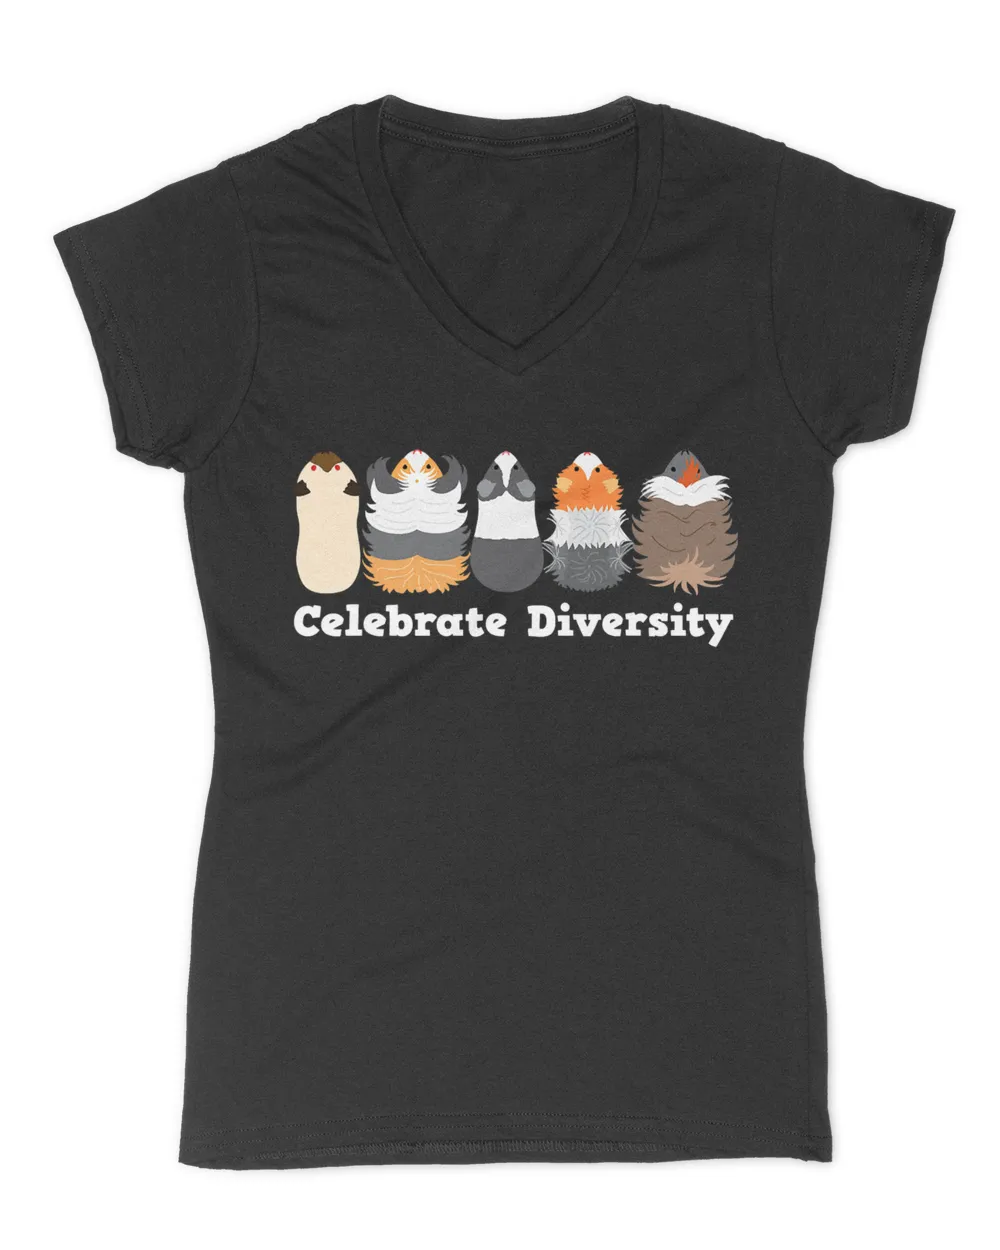 Funny 'Celebrate Diversity' Cute Shirt for Guinea Pig Lovers T-Shirt